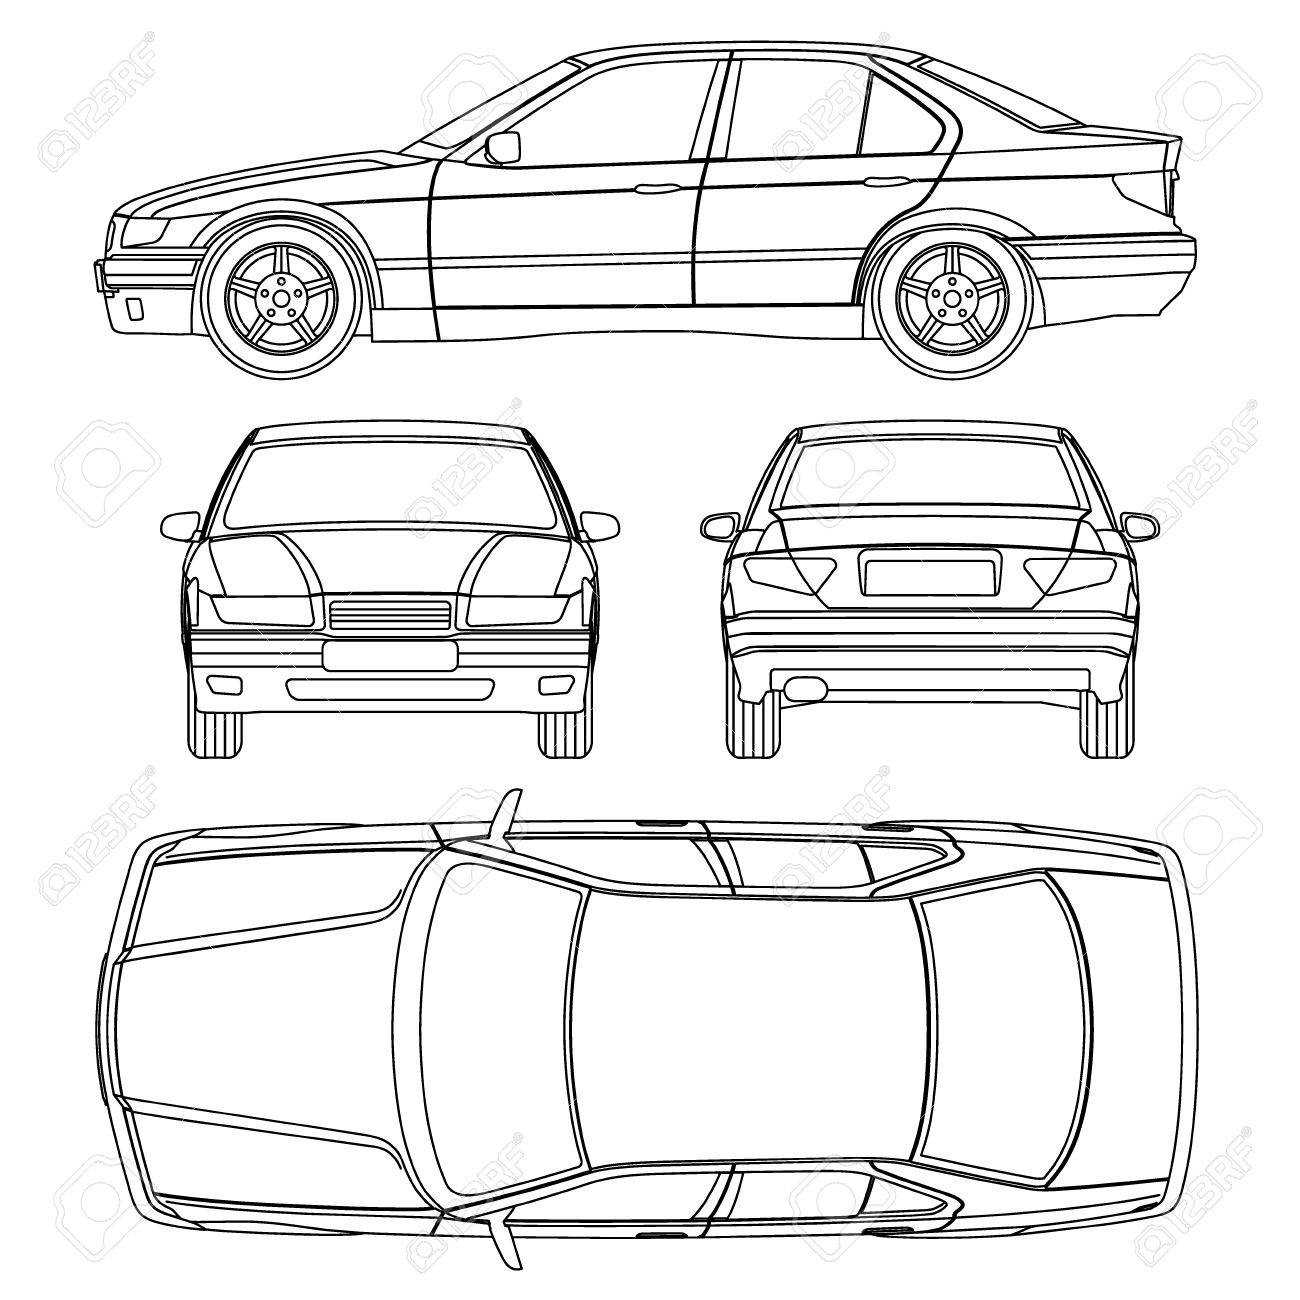 Car Line Draw Insurance Damage, Condition Report Form Regarding Truck Condition Report Template